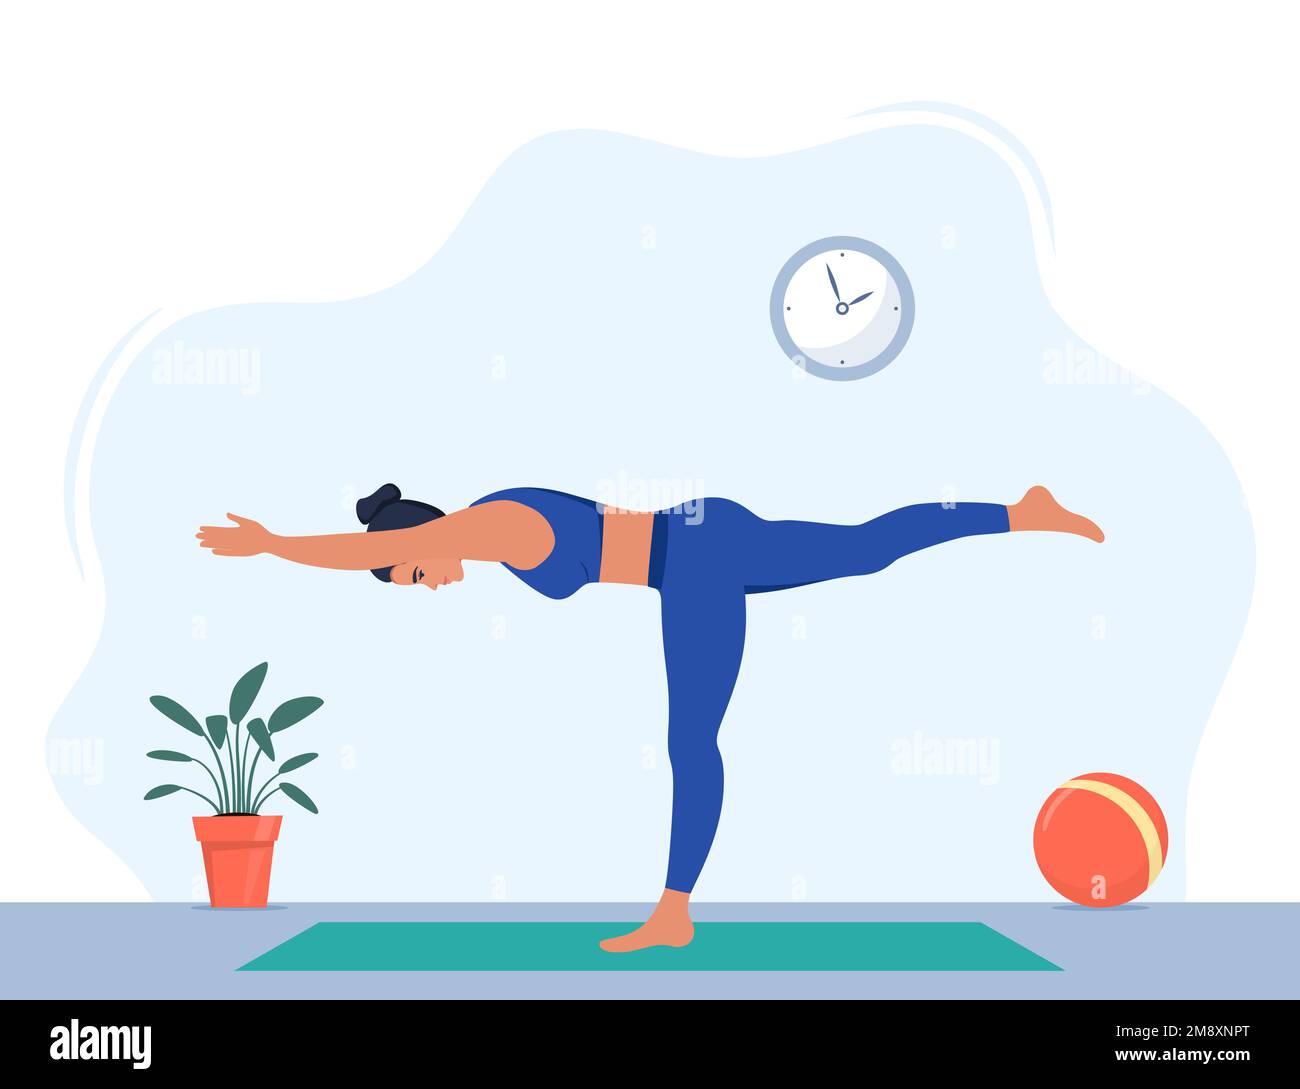 Yoga full-body 5-minute workout training set. Young woman planking exercise  isolated. Vector flat style illustration Stock Vector